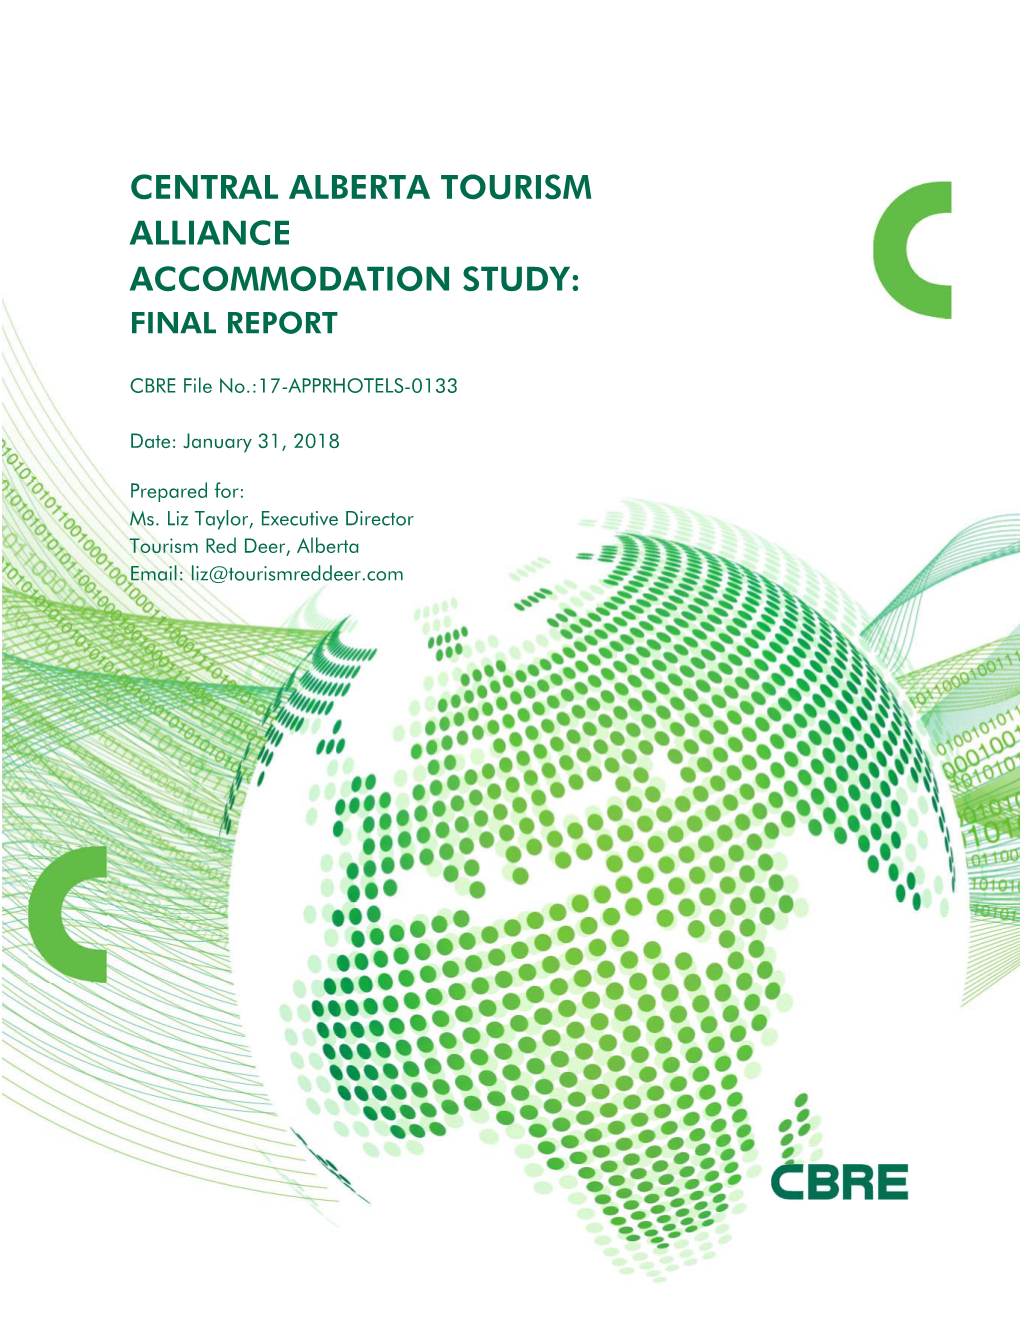 Central Alberta Tourism Alliance Accommodation Study: Final Report